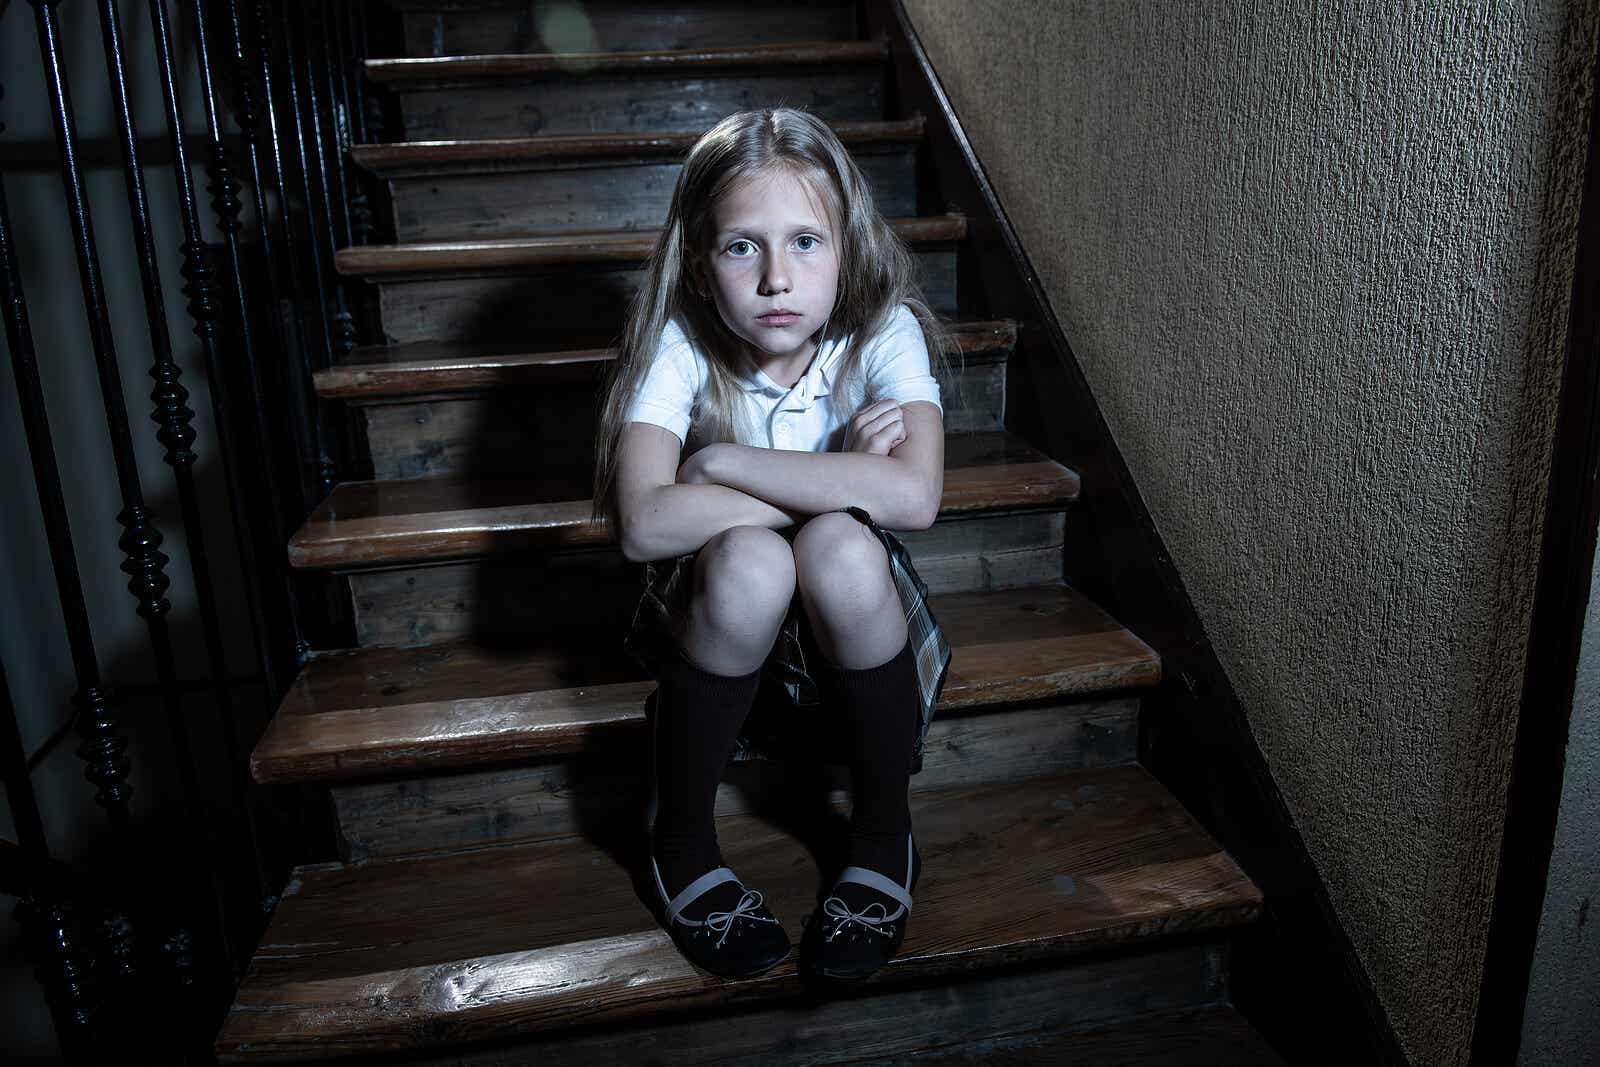 A child wearing a school uniform, sitting on the stairs of her home.